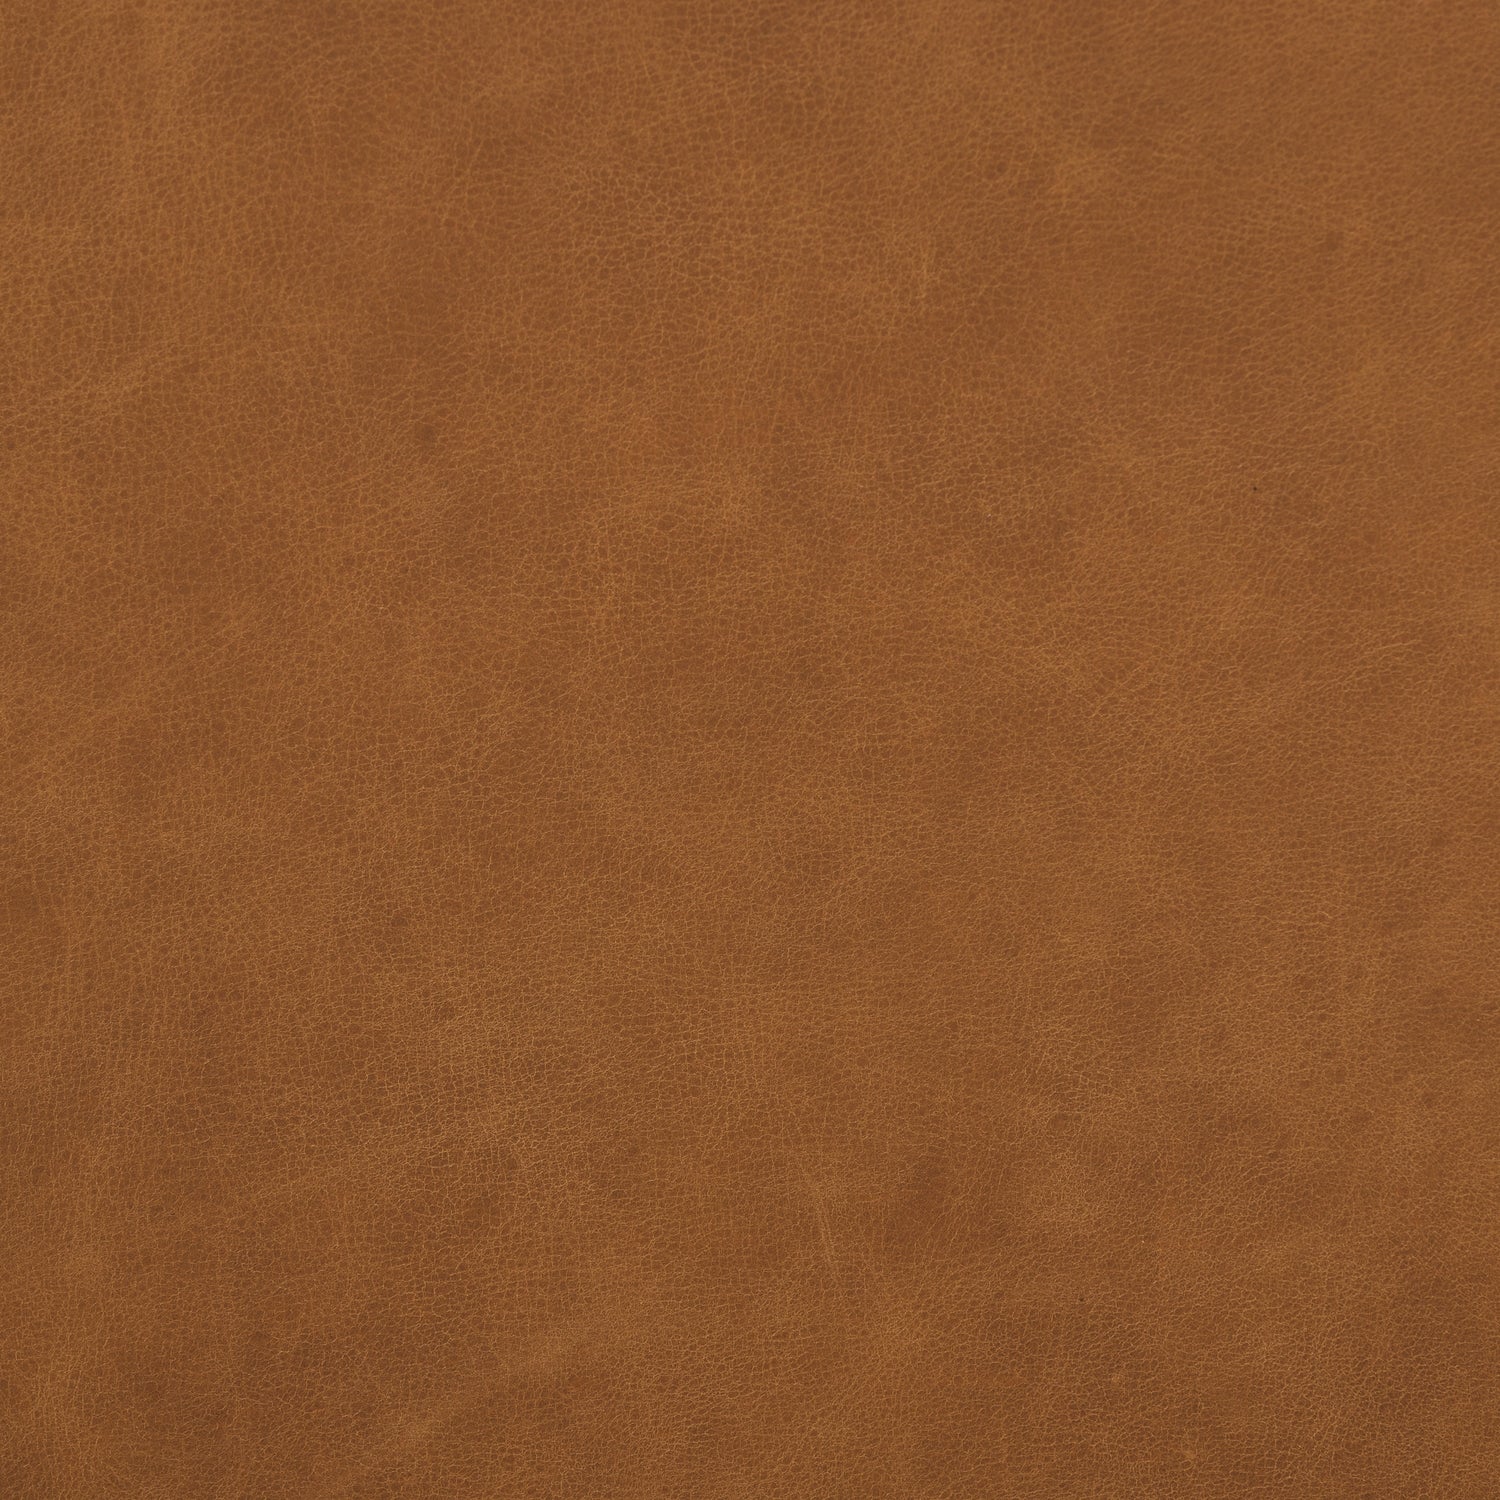 Leather Swatches Saddle Tan